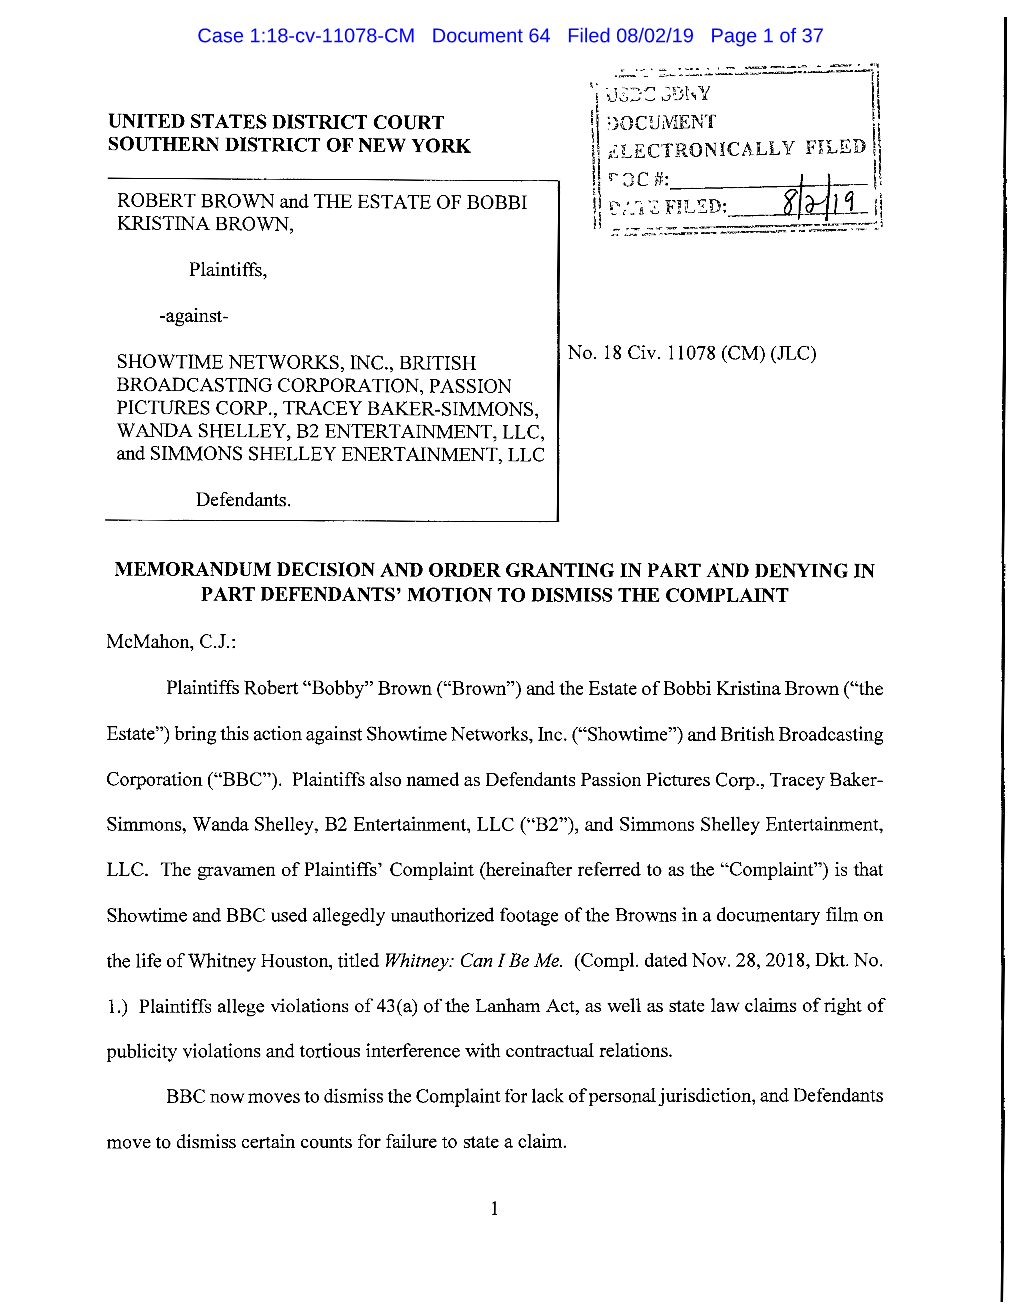 Case 1:18-Cv-11078-CM Document 64 Filed 08/02/19 Page 1 of 37